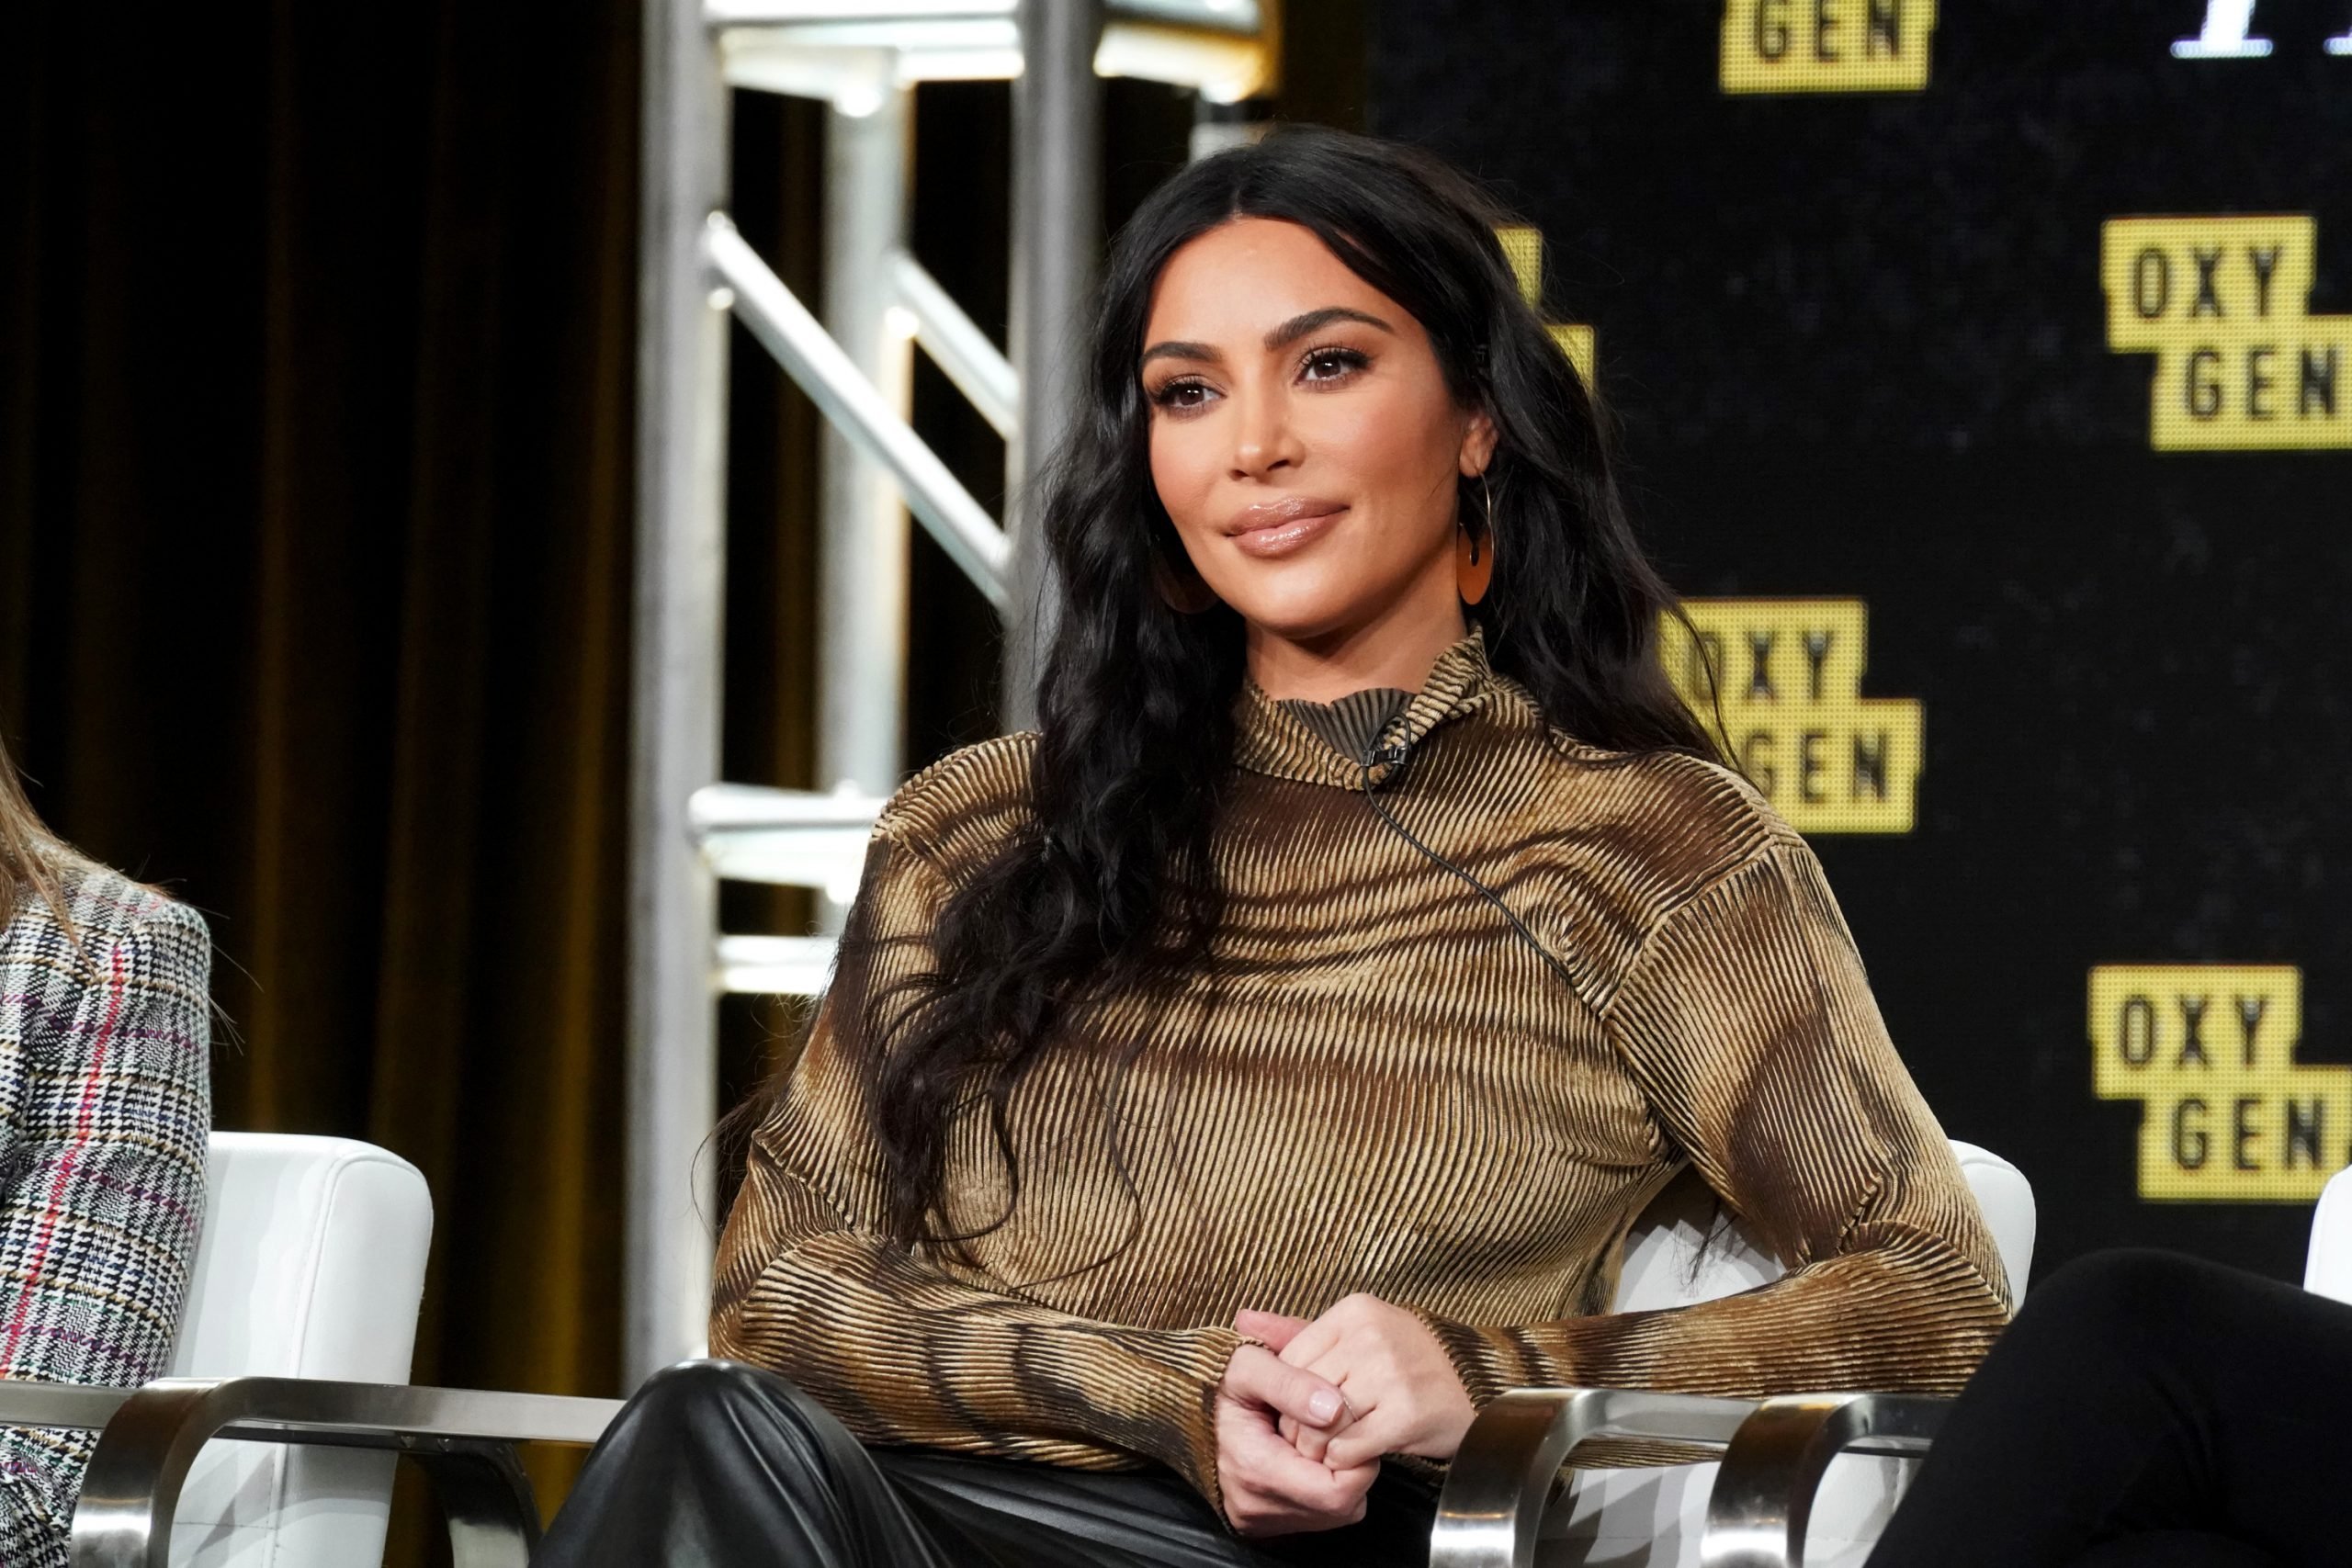 Kim Kardashian West sits and smiles at an event.